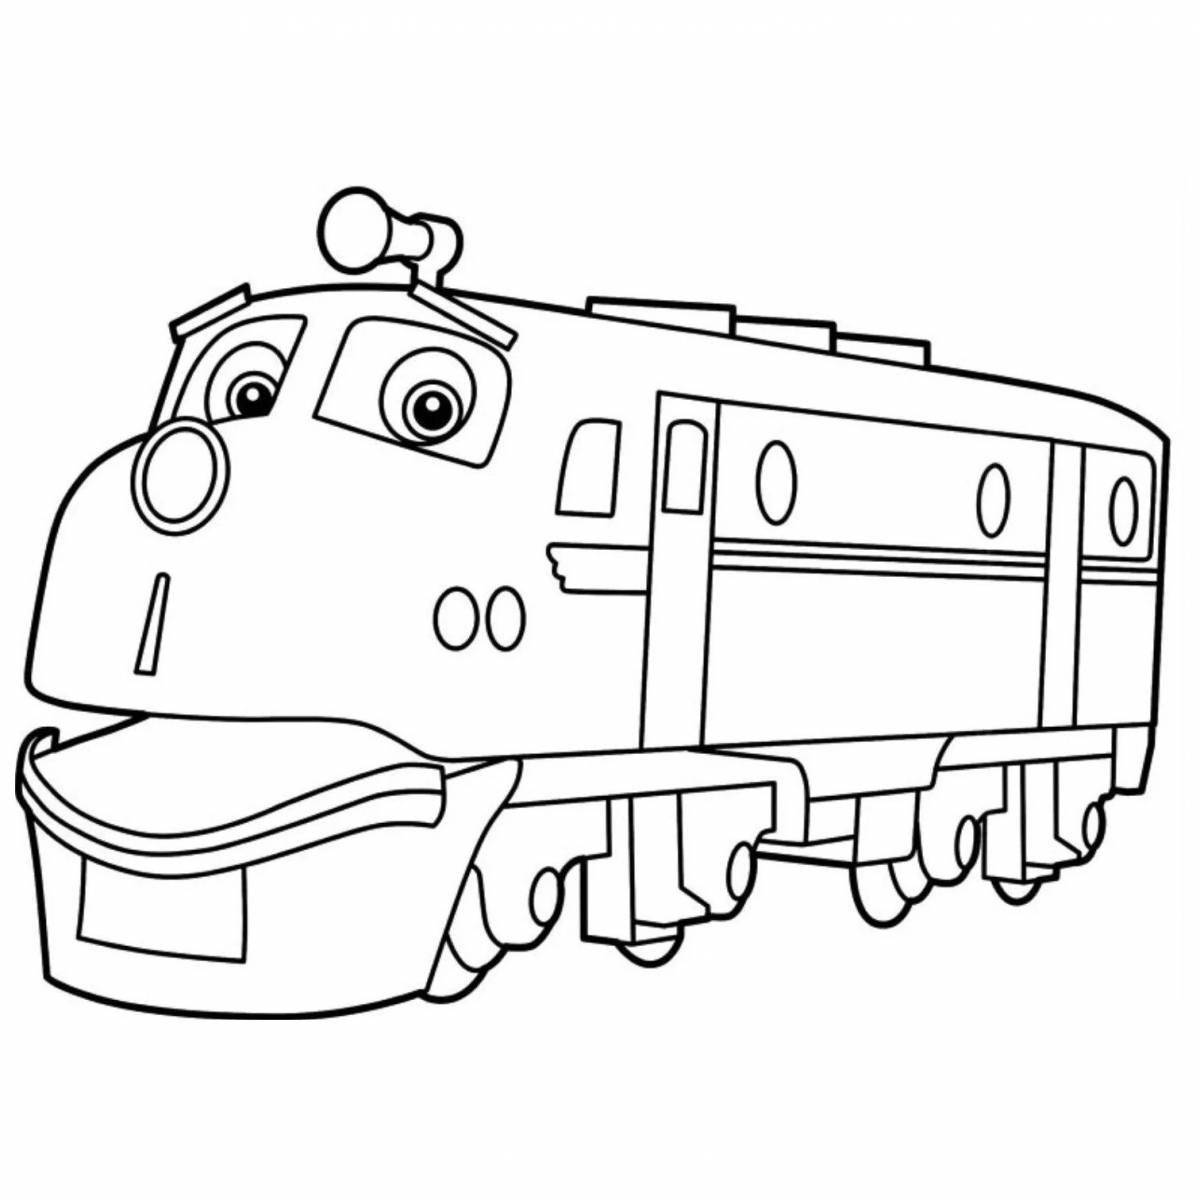 Earth ghost train coloring page